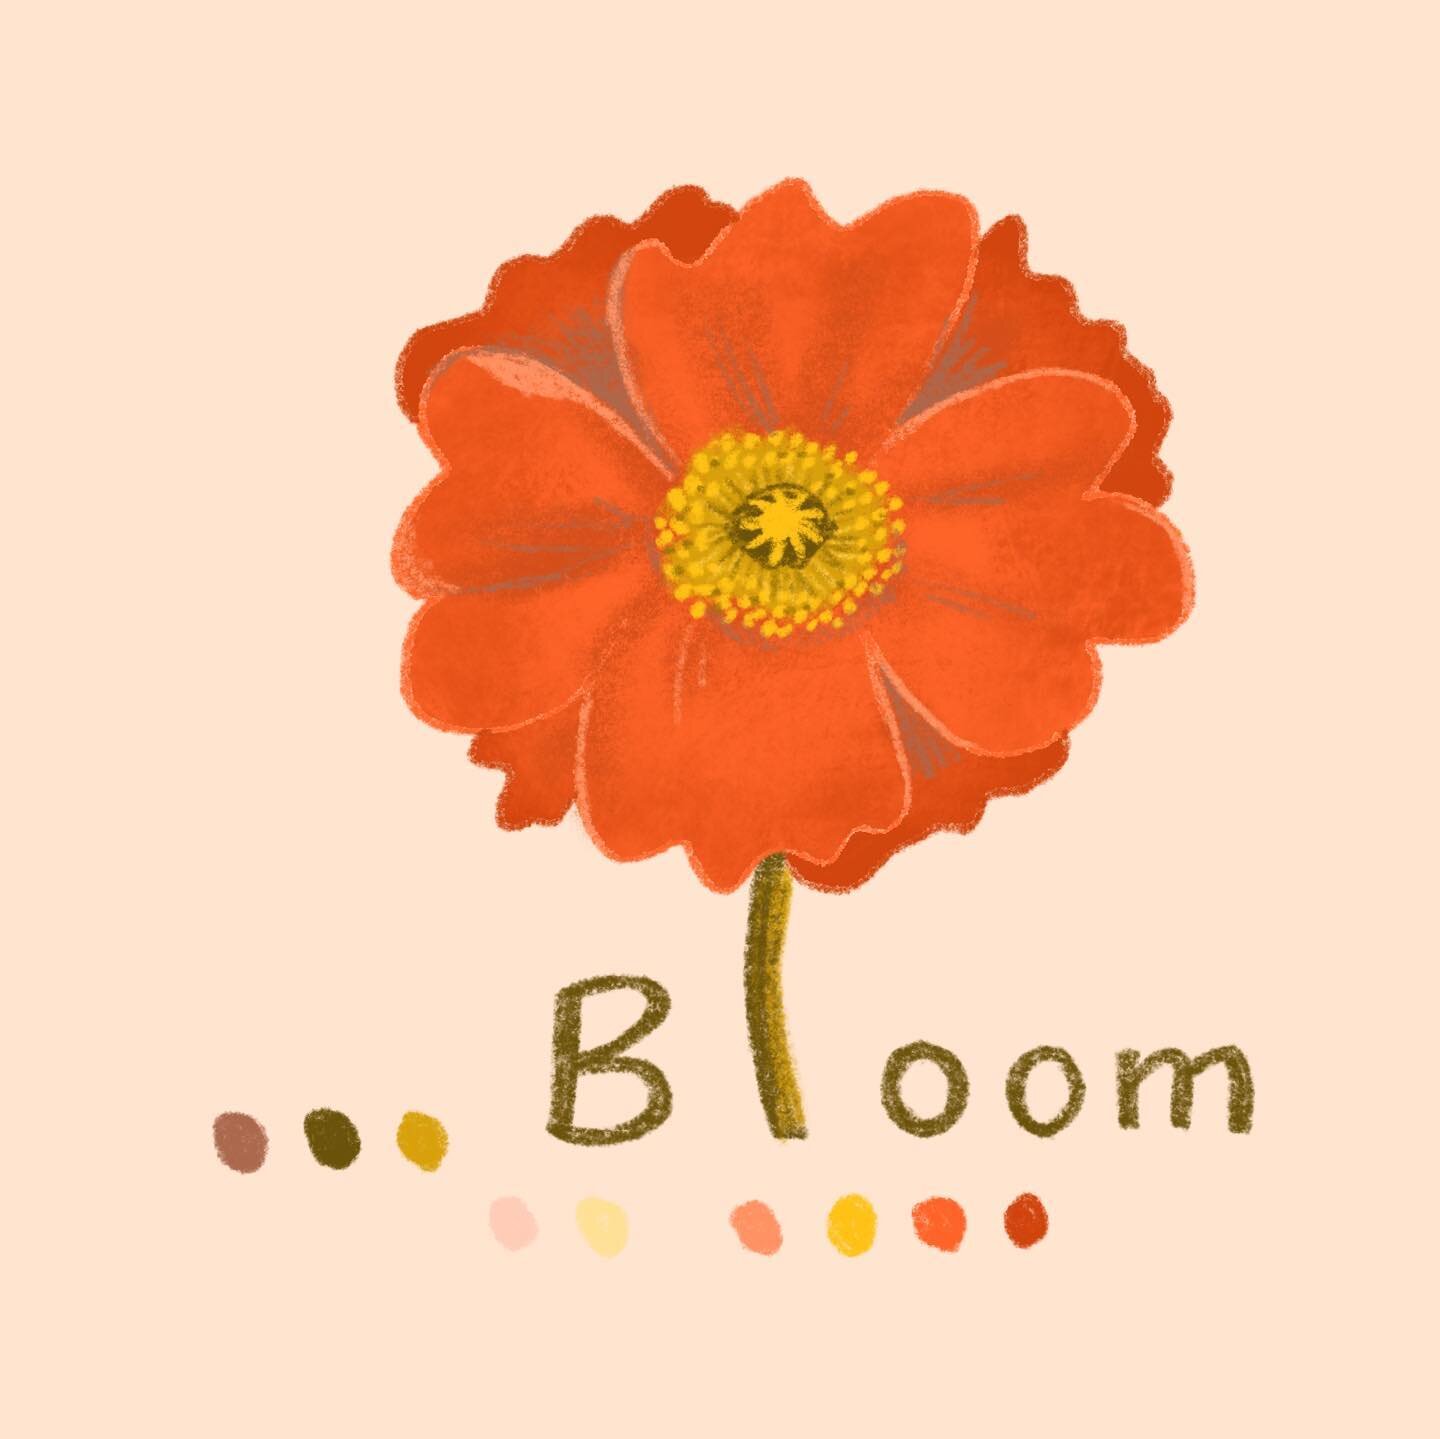 BLOOM my dear ... I have been taking a break for a bit. We finished the sketches stage for the book &bdquo;Die Baumtuer&ldquo; and now it is time to explore colour palettes and the general feeling of the book. This is one of my experiments using only